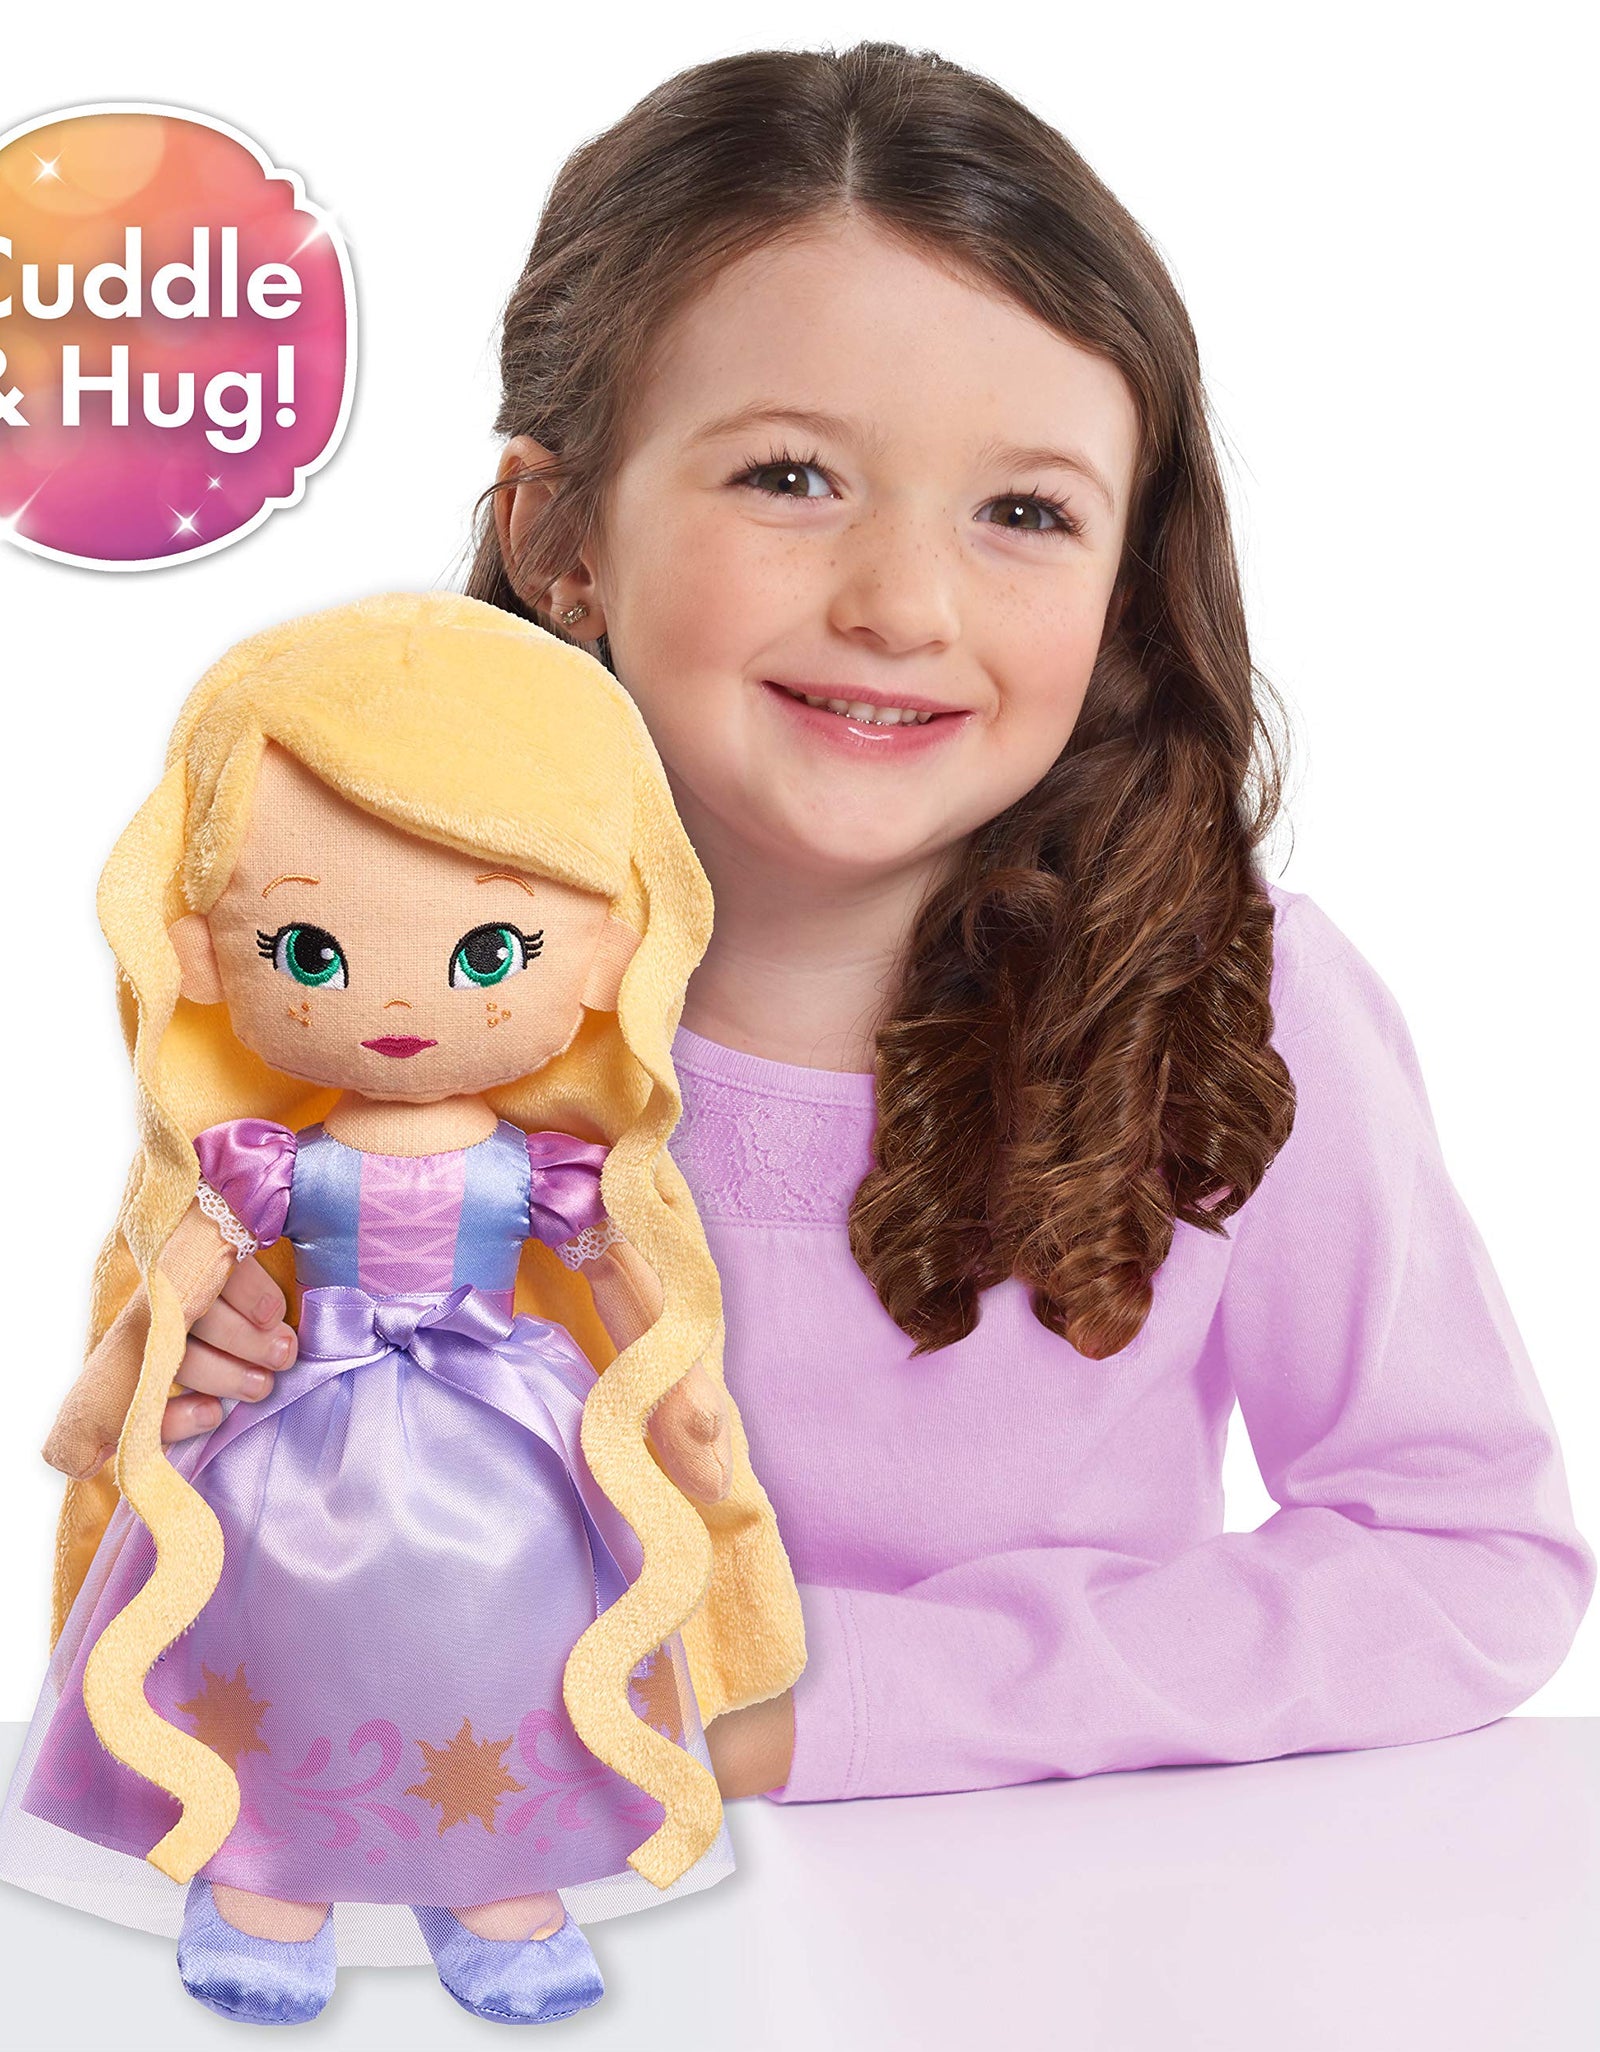 Disney Princess So Sweet Princess Rapunzel, 12.5 Inch Plush with Blonde Hair, Tangled, by Just Play